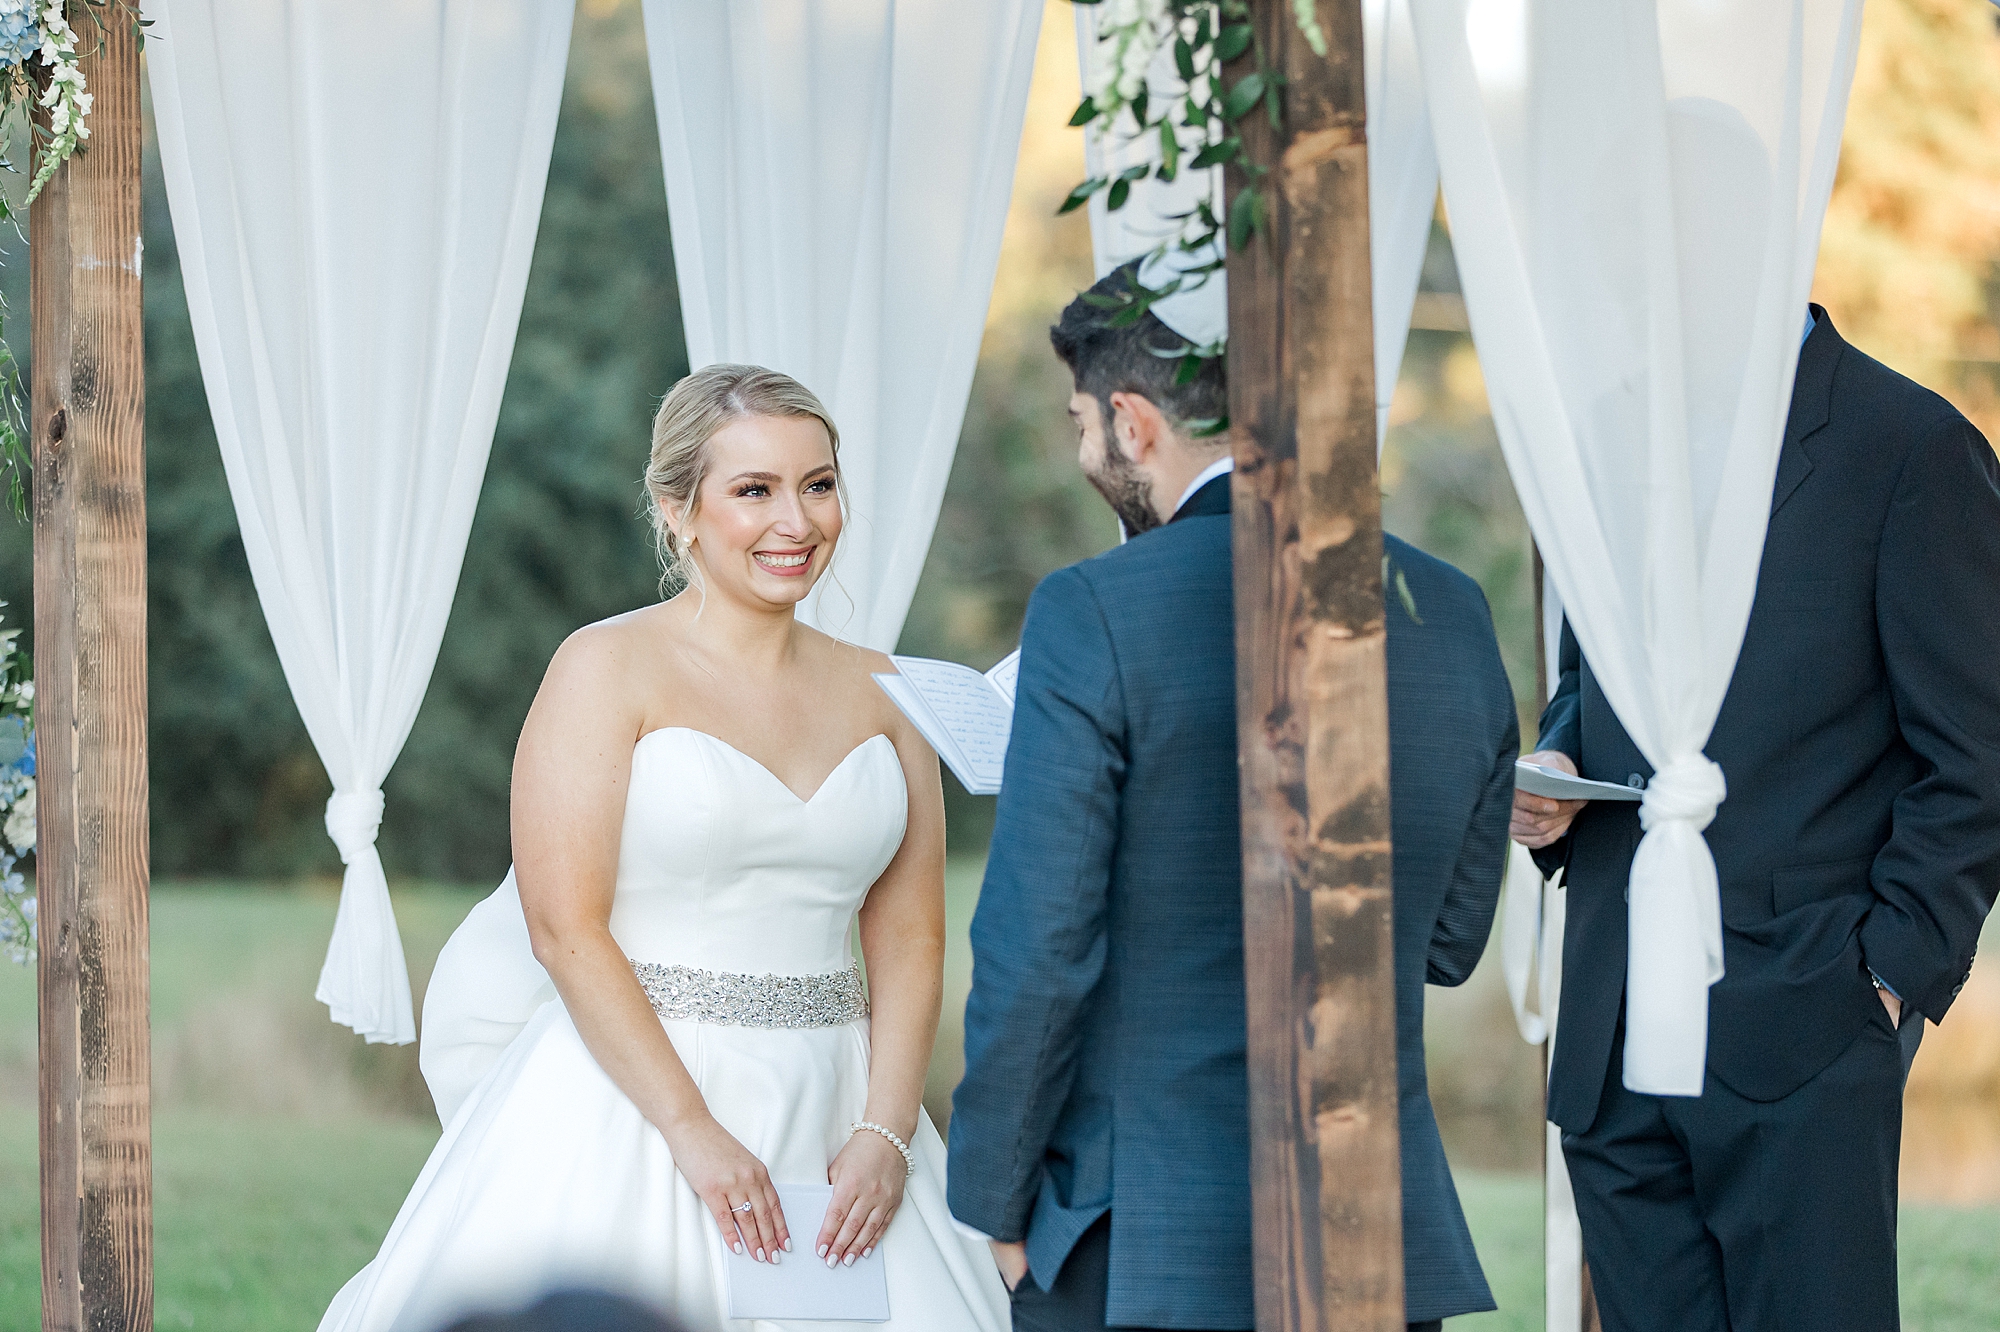 groom reads vows to bride